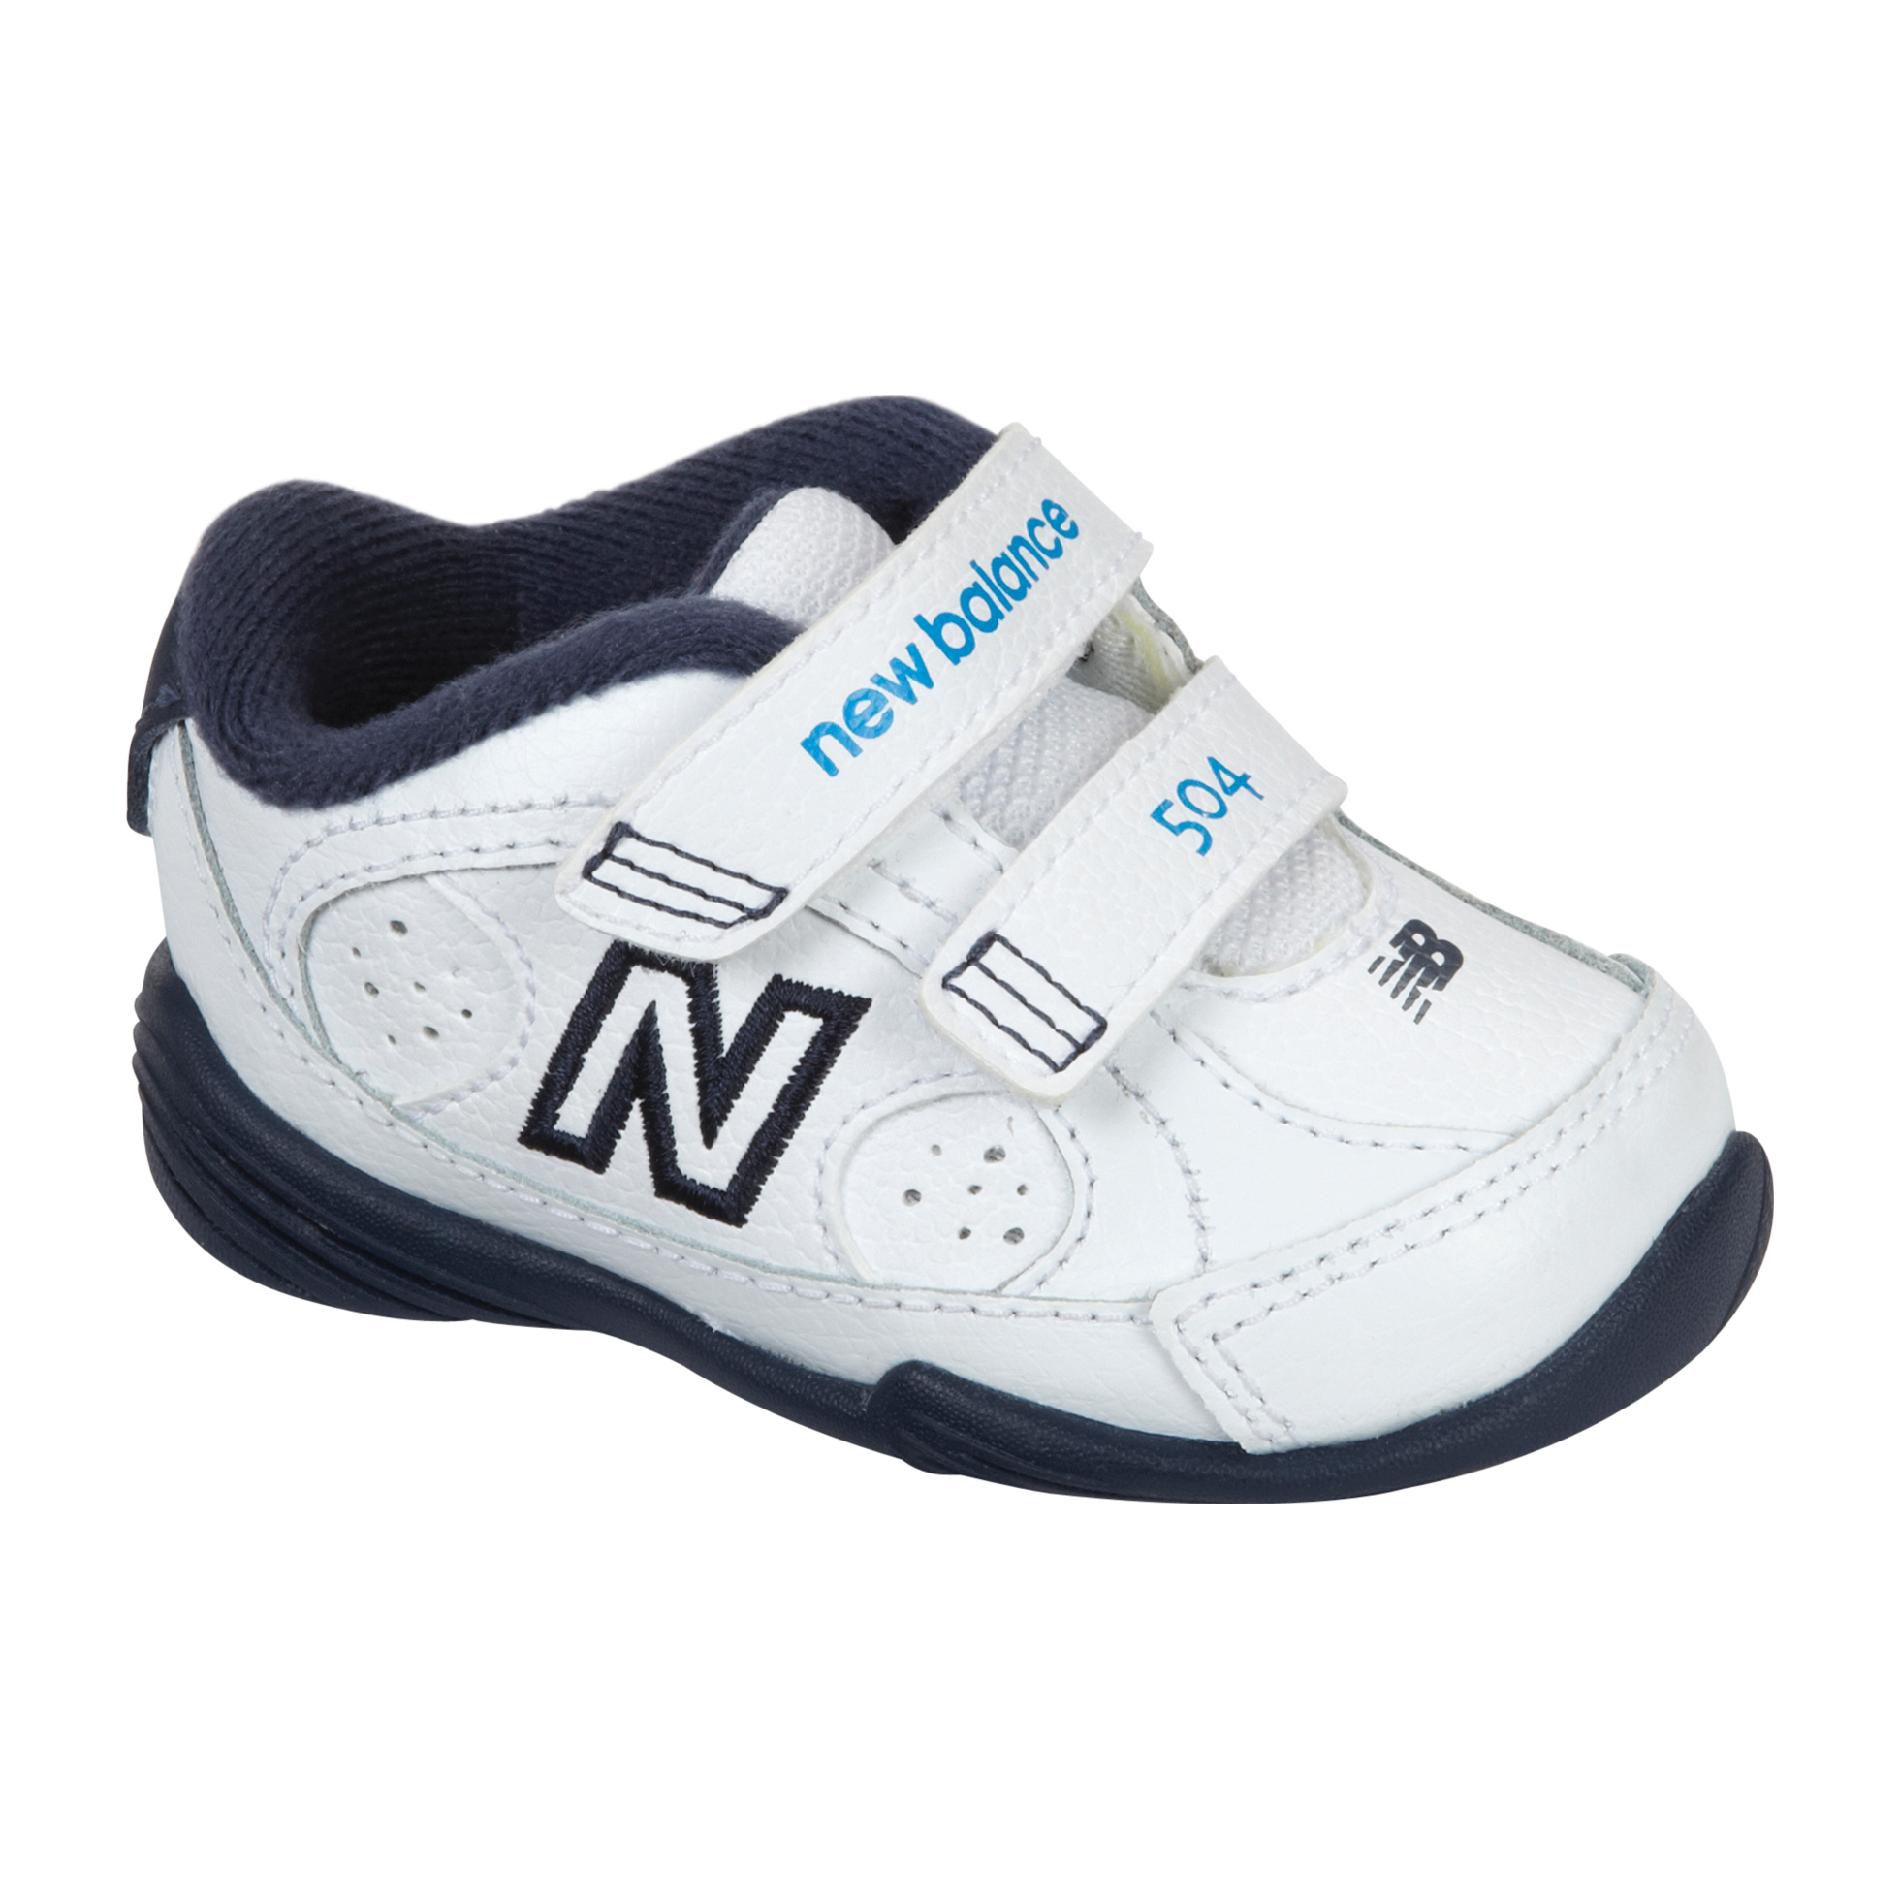 New Balance Toddler Boy's 504 Athletic Shoe Extra Wide ...